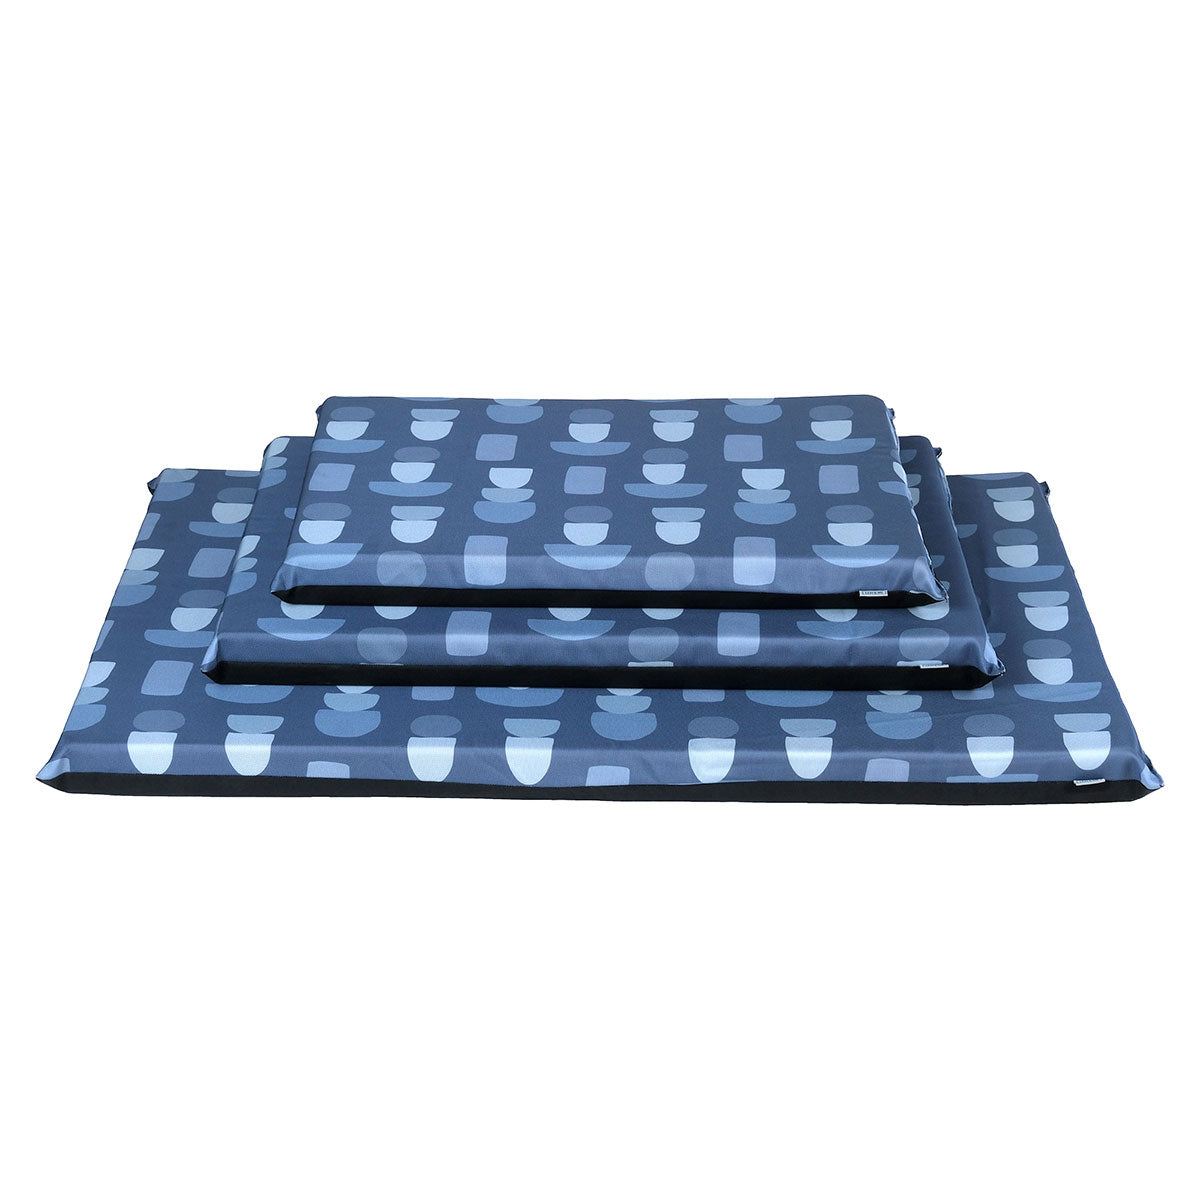 Lexi & Me Kennel/Crate Mat Steel Blue Geo Large/X-Large